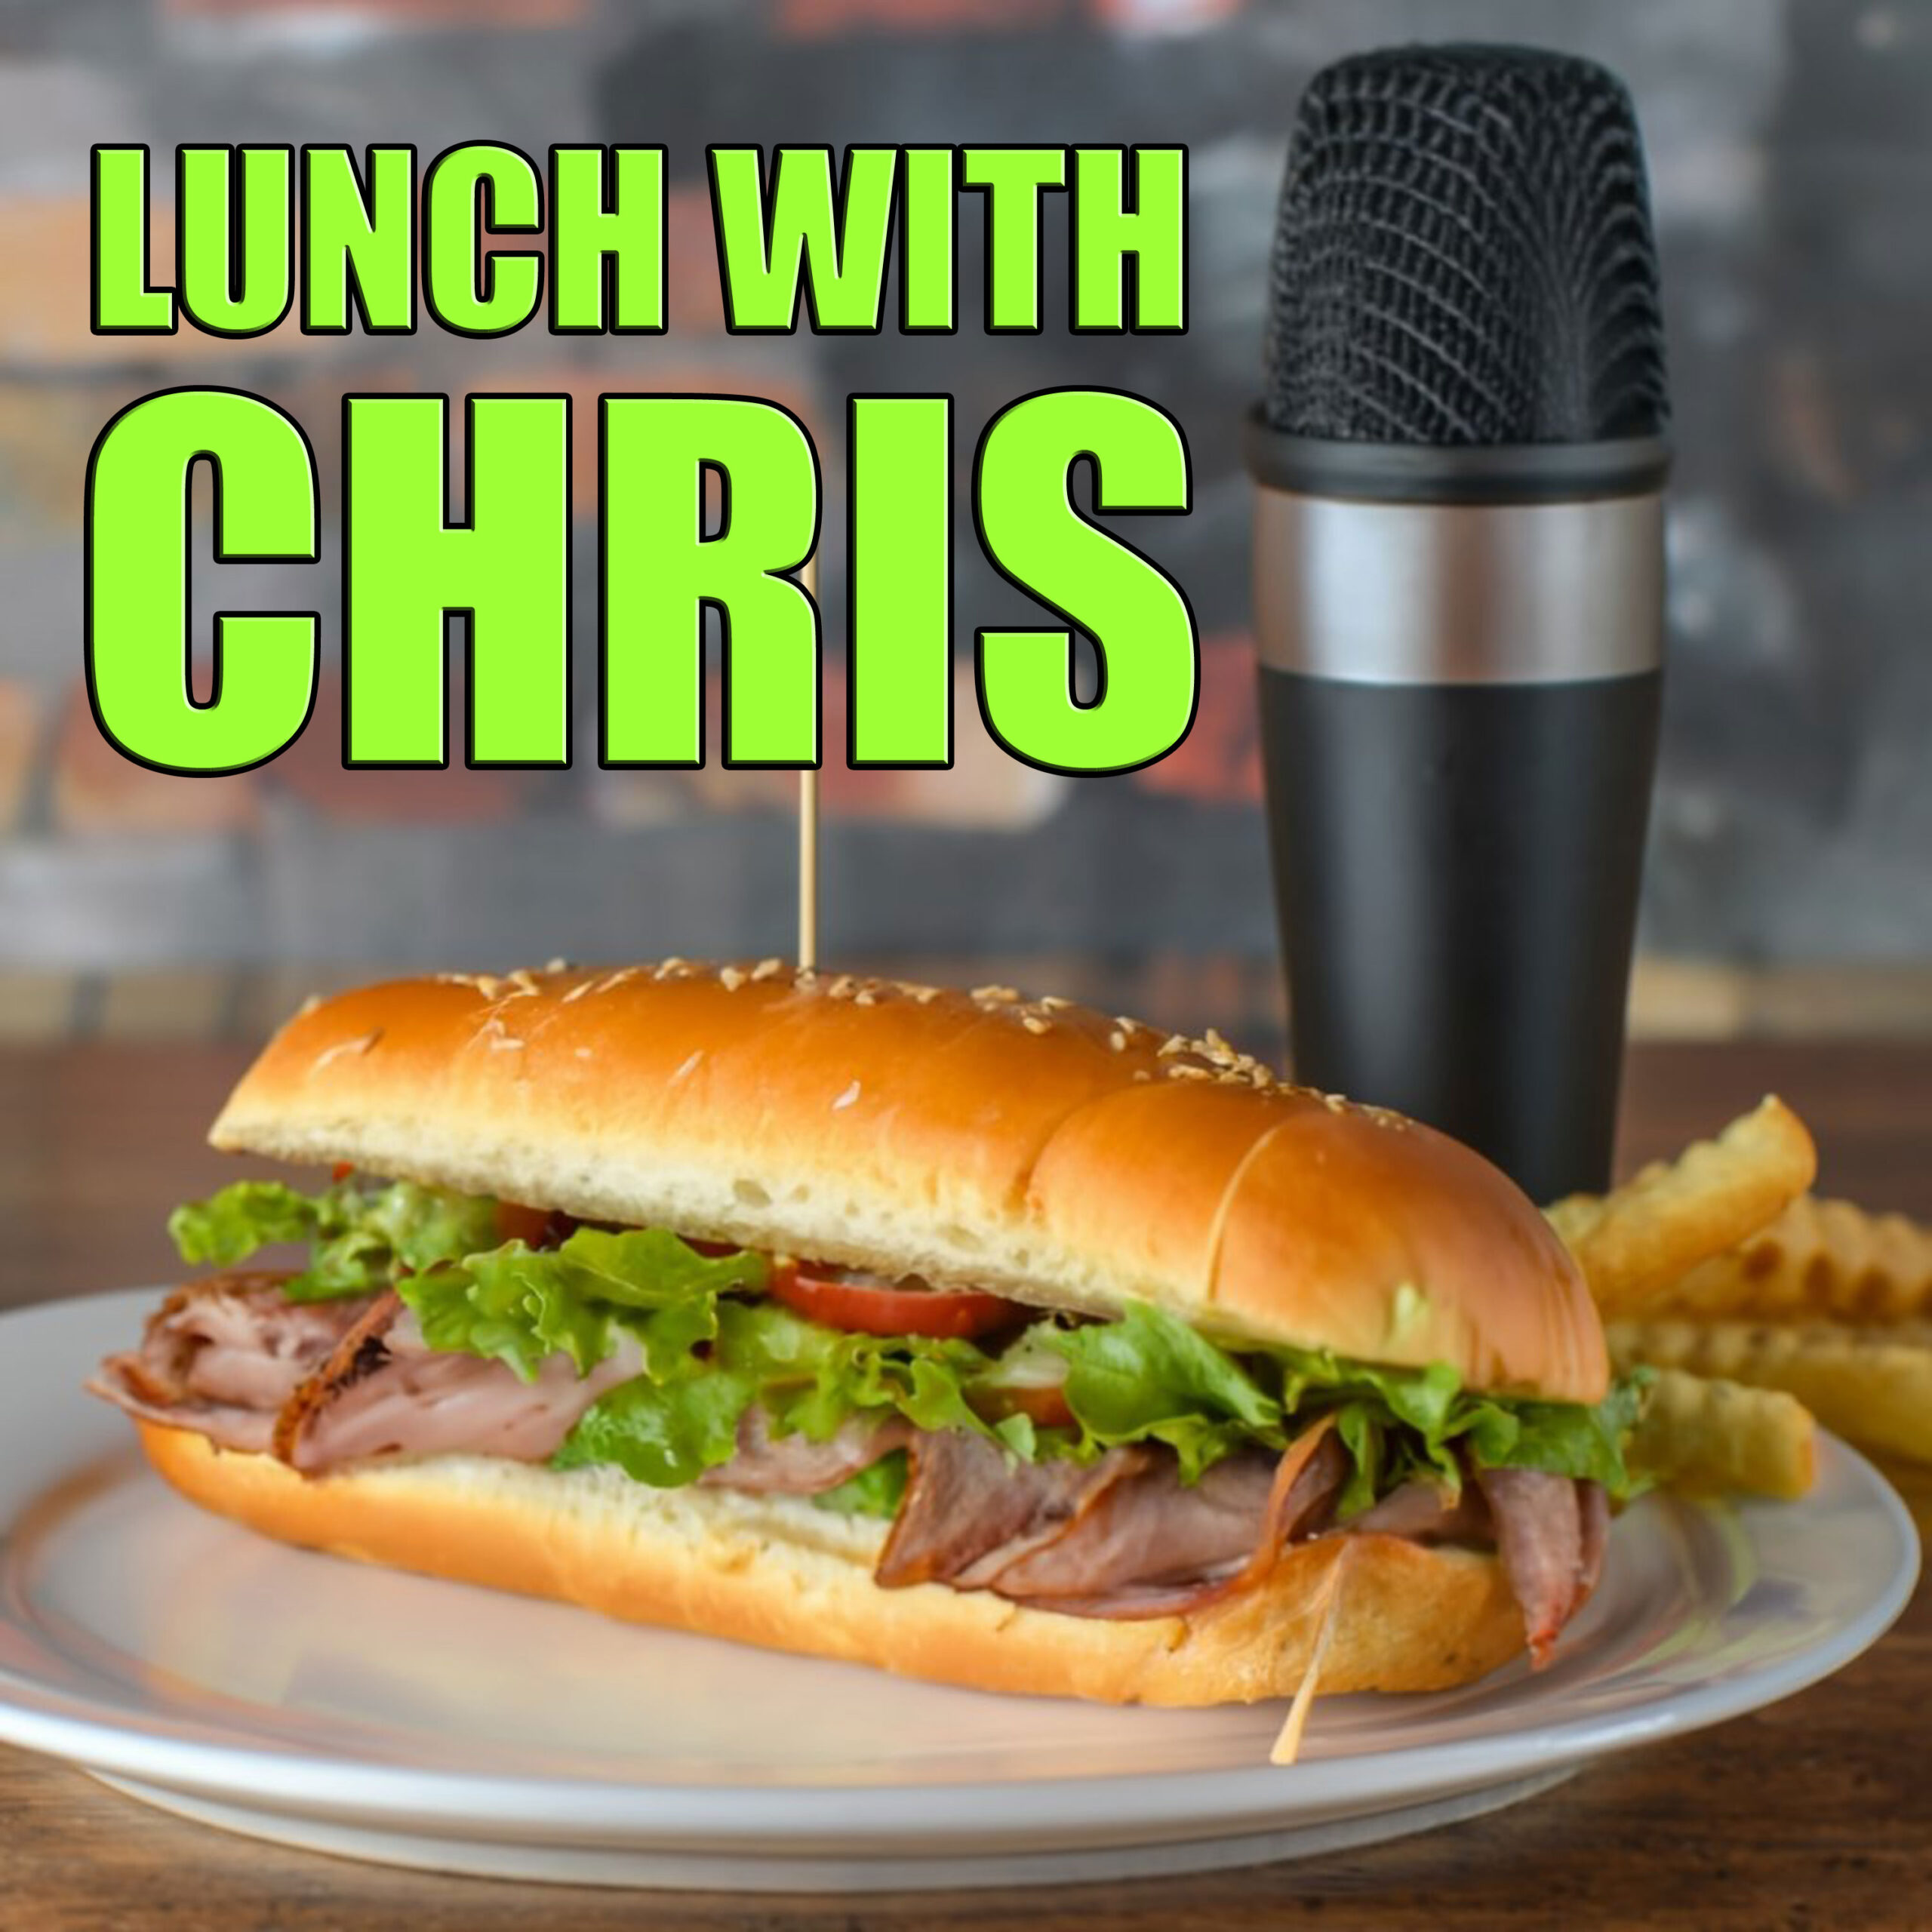 Lunch With Chris podcast. Where Chris Doelle sits down with movers, shakers, news makers and just cool people. Join him as he shares their unique stories.